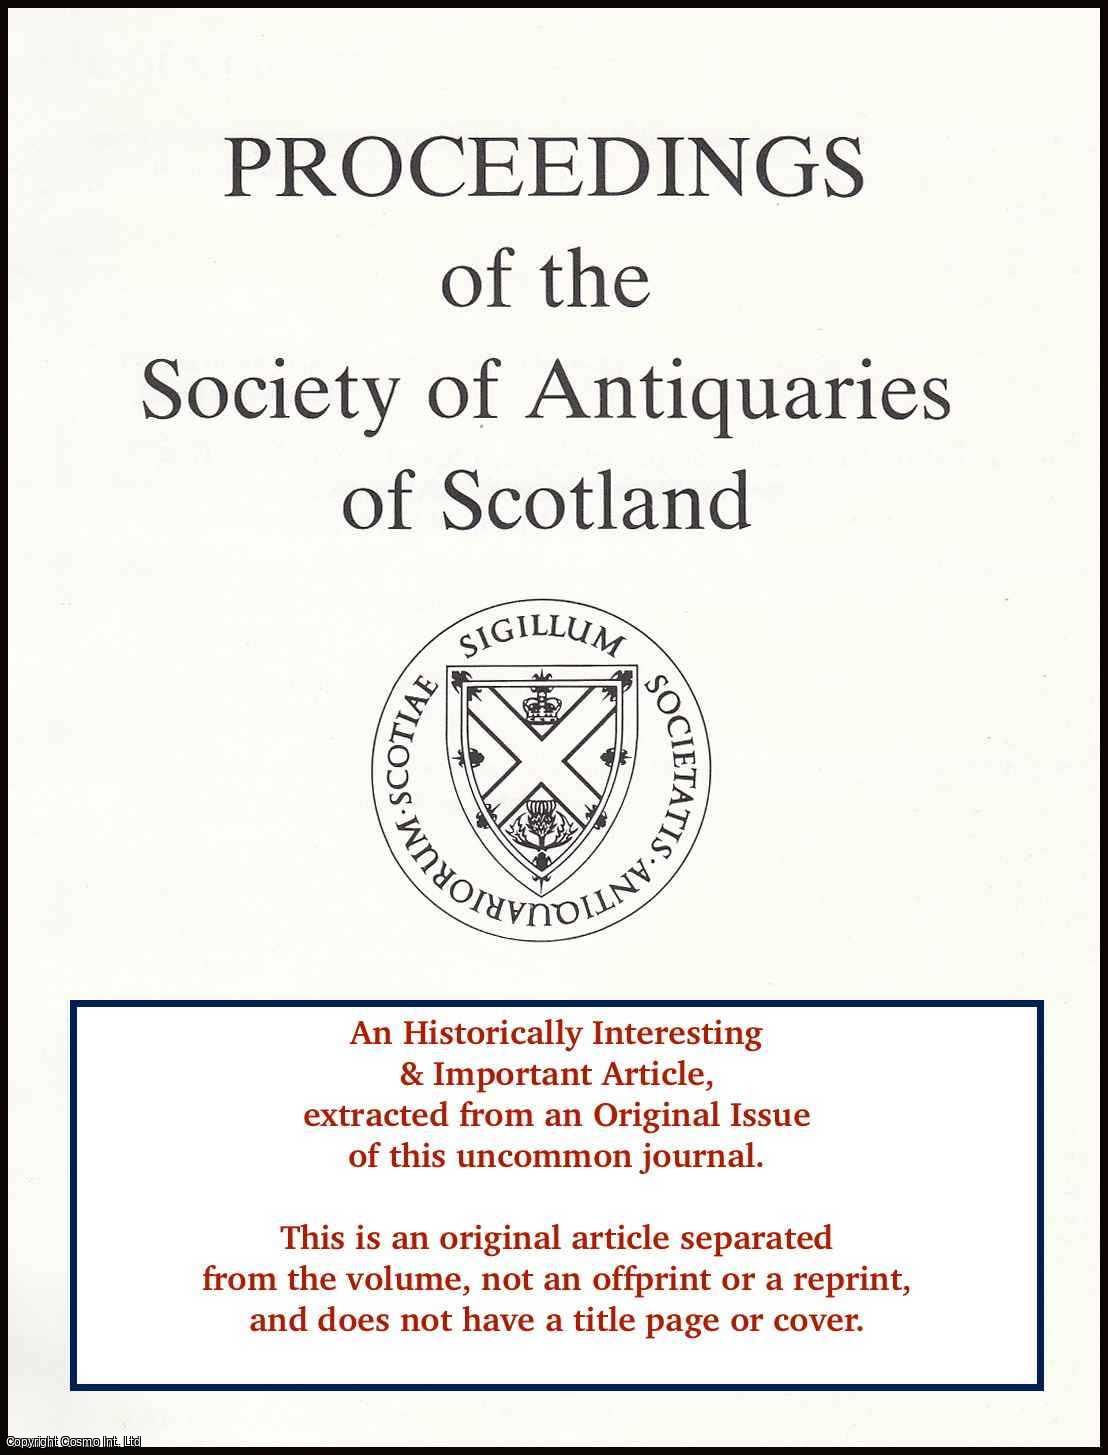 H. Gordon Slade - Castle Fraser: A Seat of The Ancient Family of Fraser. An original article from the Proceedings of the Society of Antiquaries of Scotland, 1978.